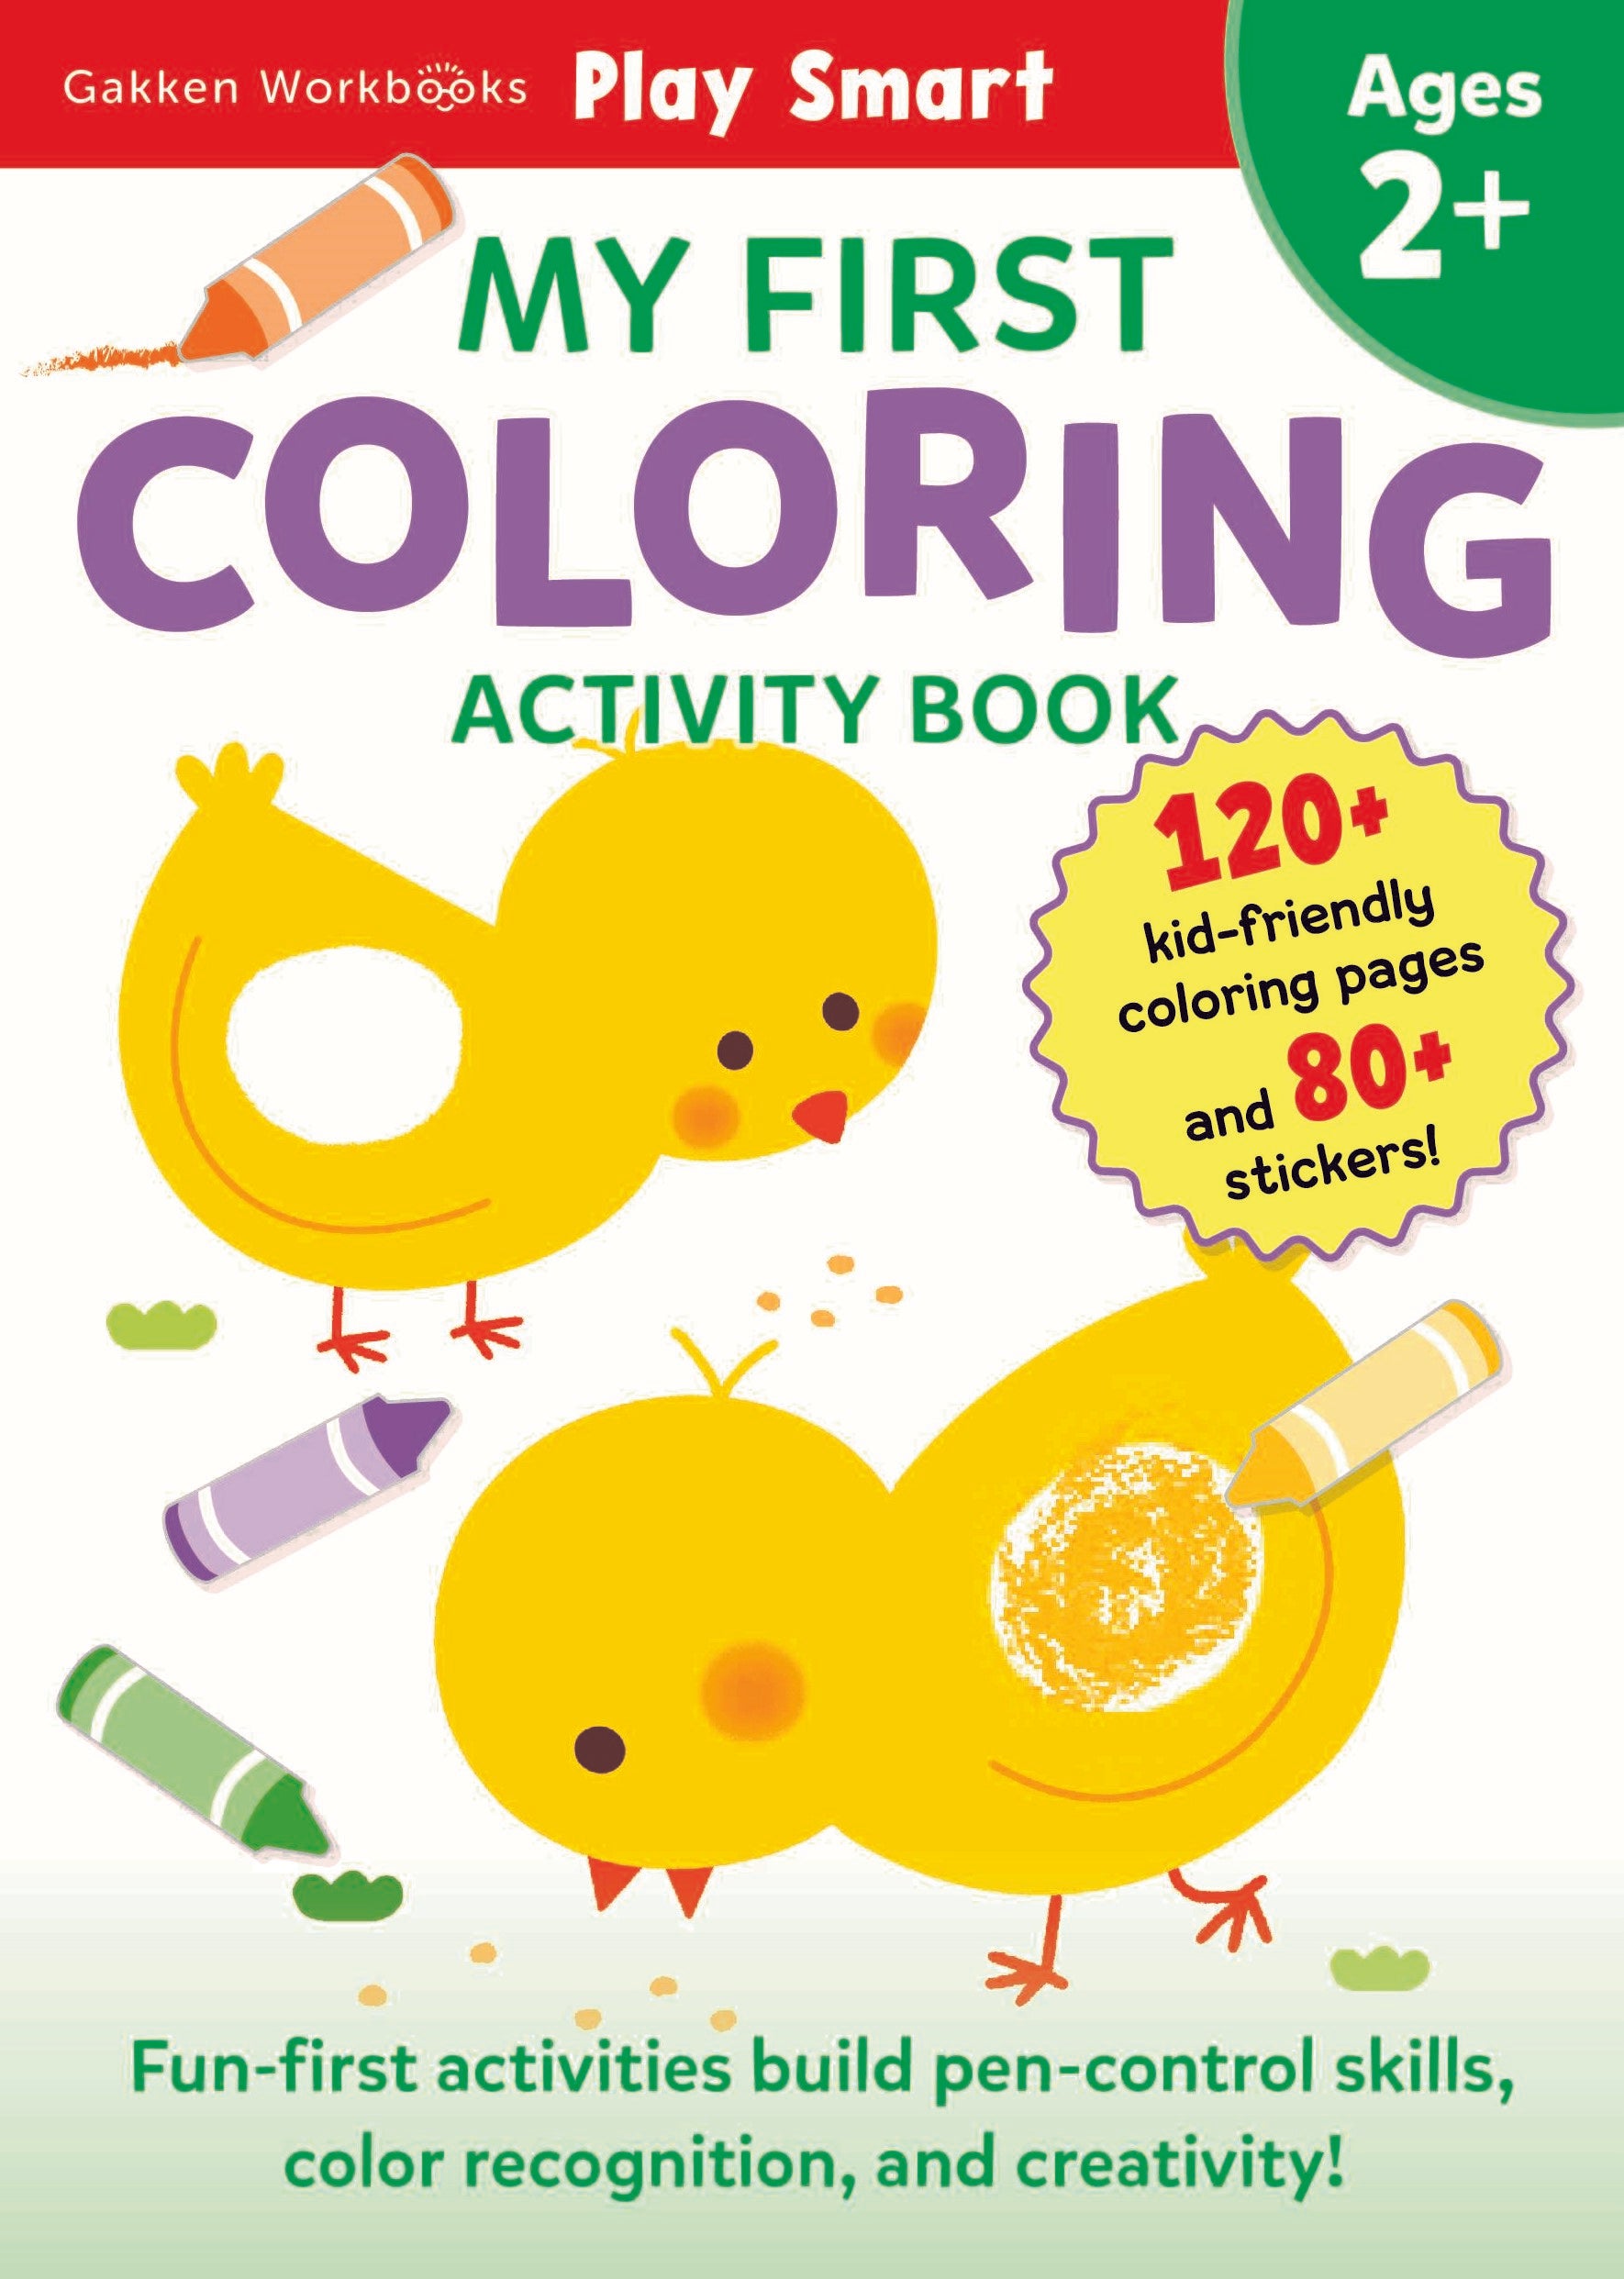 PLAY SMART My First Coloring Activity Book 2+